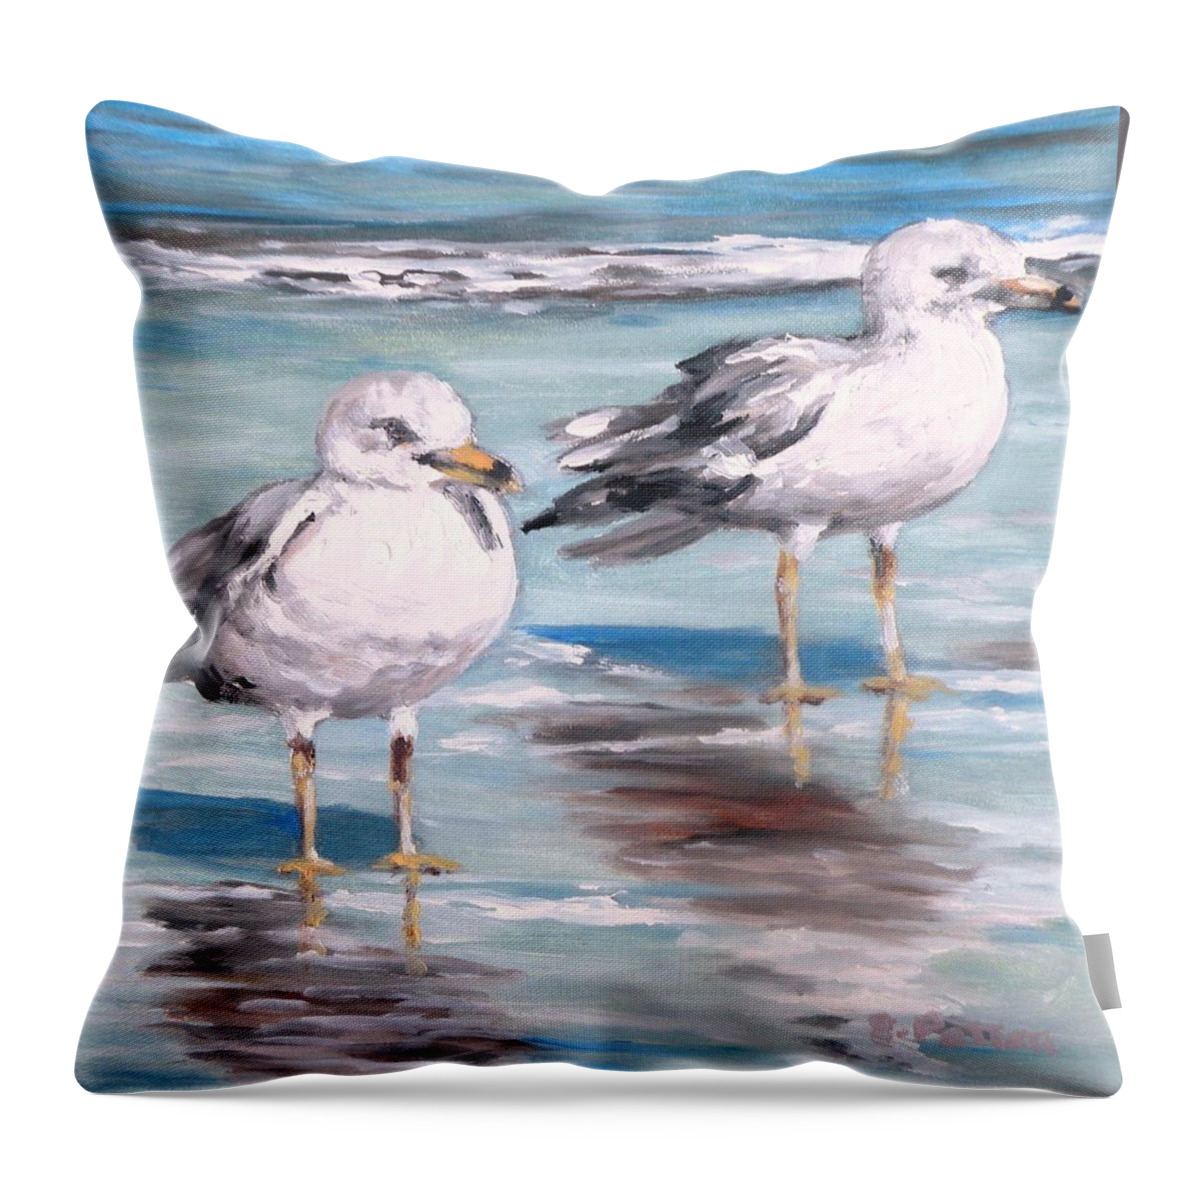 Gulls Throw Pillow featuring the painting Gulls by Eileen Patten Oliver